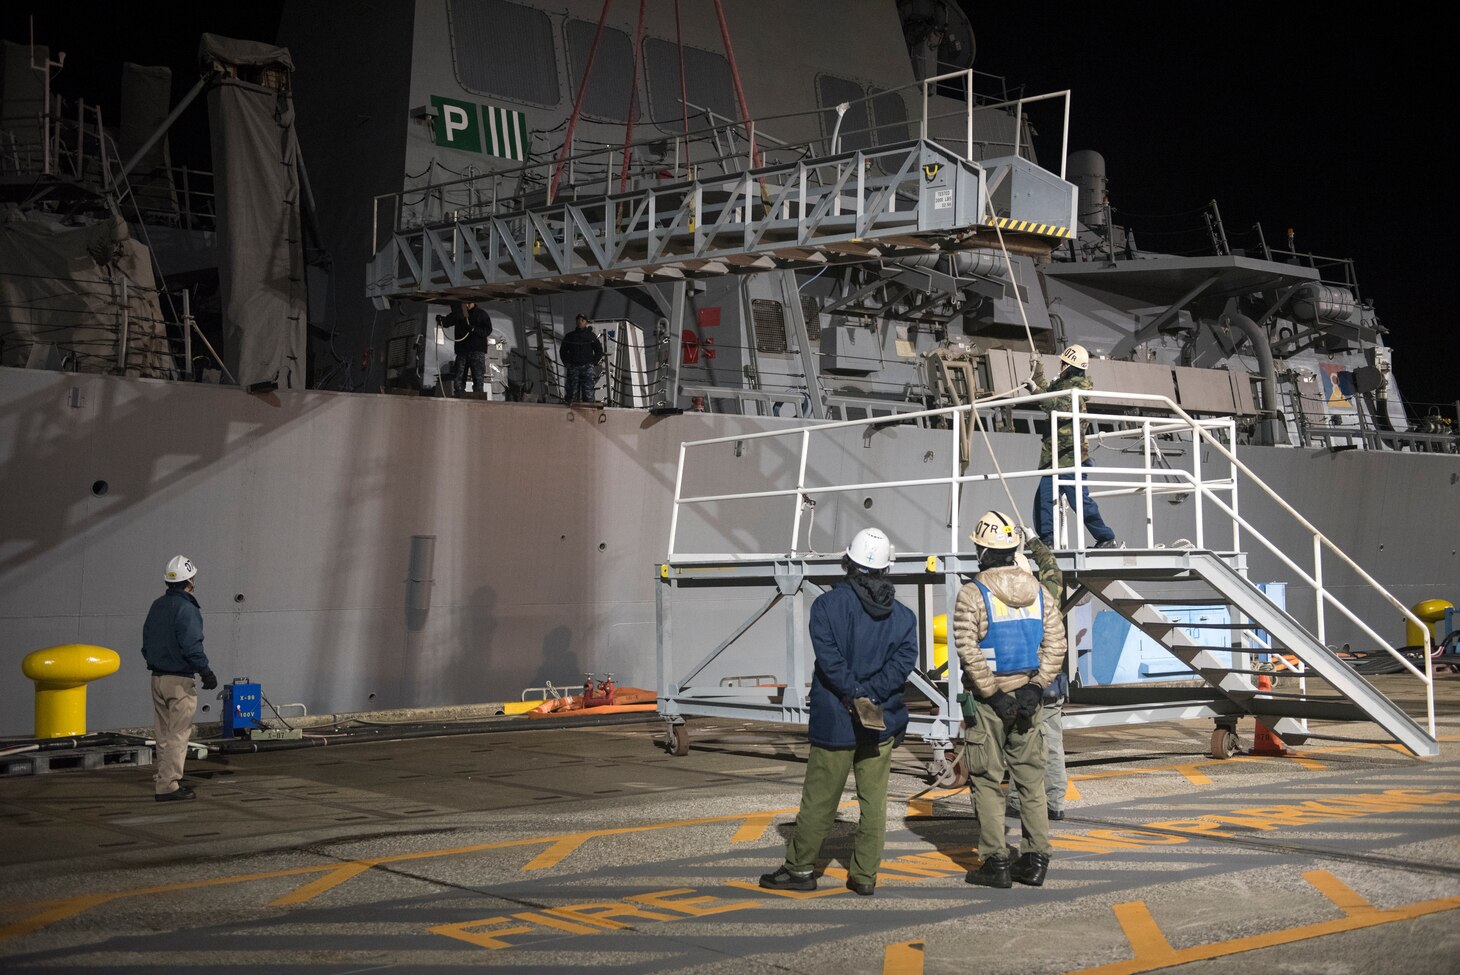 Workers remove the brow from the Arleigh Burke-class guided missile destroyer USS Fitzgerald (DDG 62) prior to being towed away from the pier at Fleet Activities (FLEACT) Yokosuka, Nov. 24, to meet heavy lift transport vessel Transshelf. Transshelf will transport Fitzgerald to Pascagoula, Mississippi for repairs.